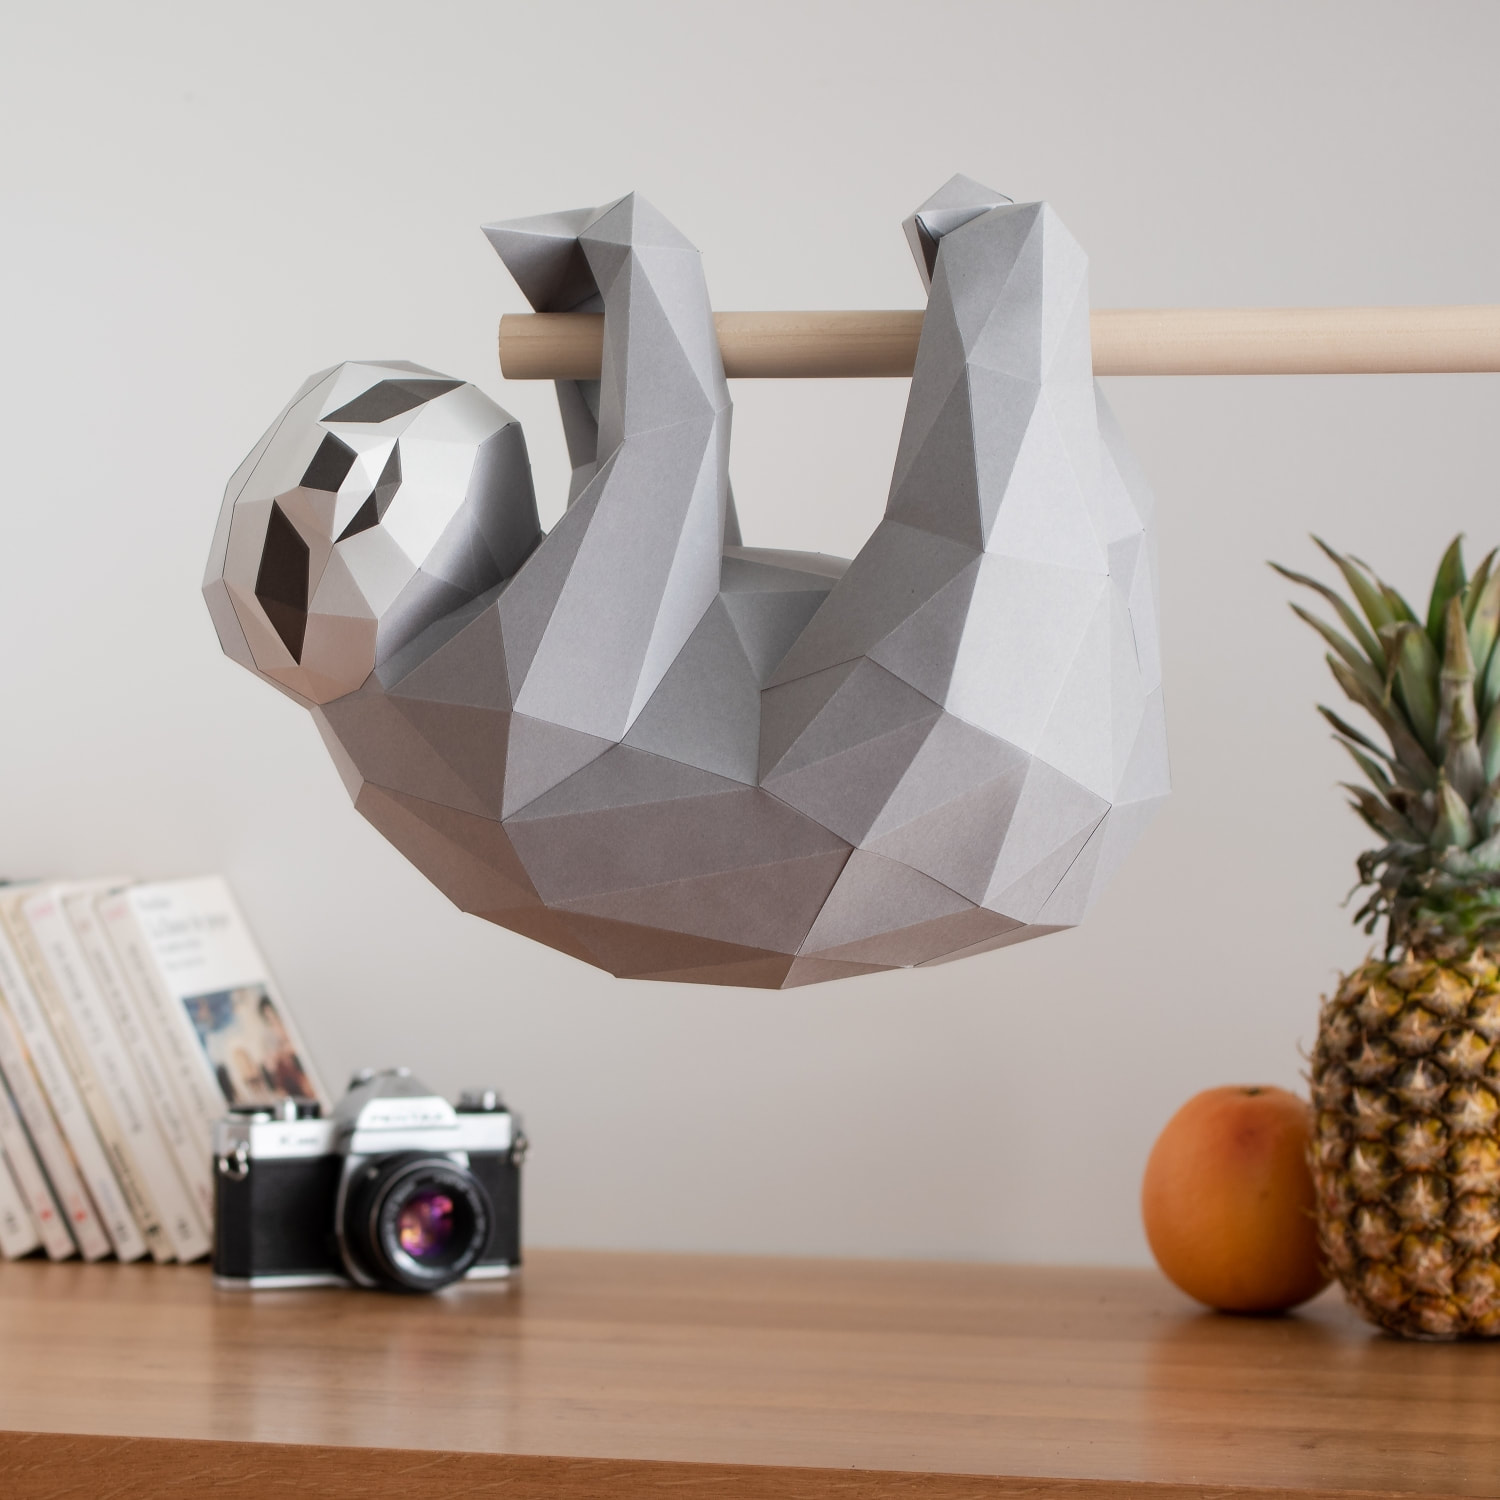 Hanging sloth d papercraft kit ready to build